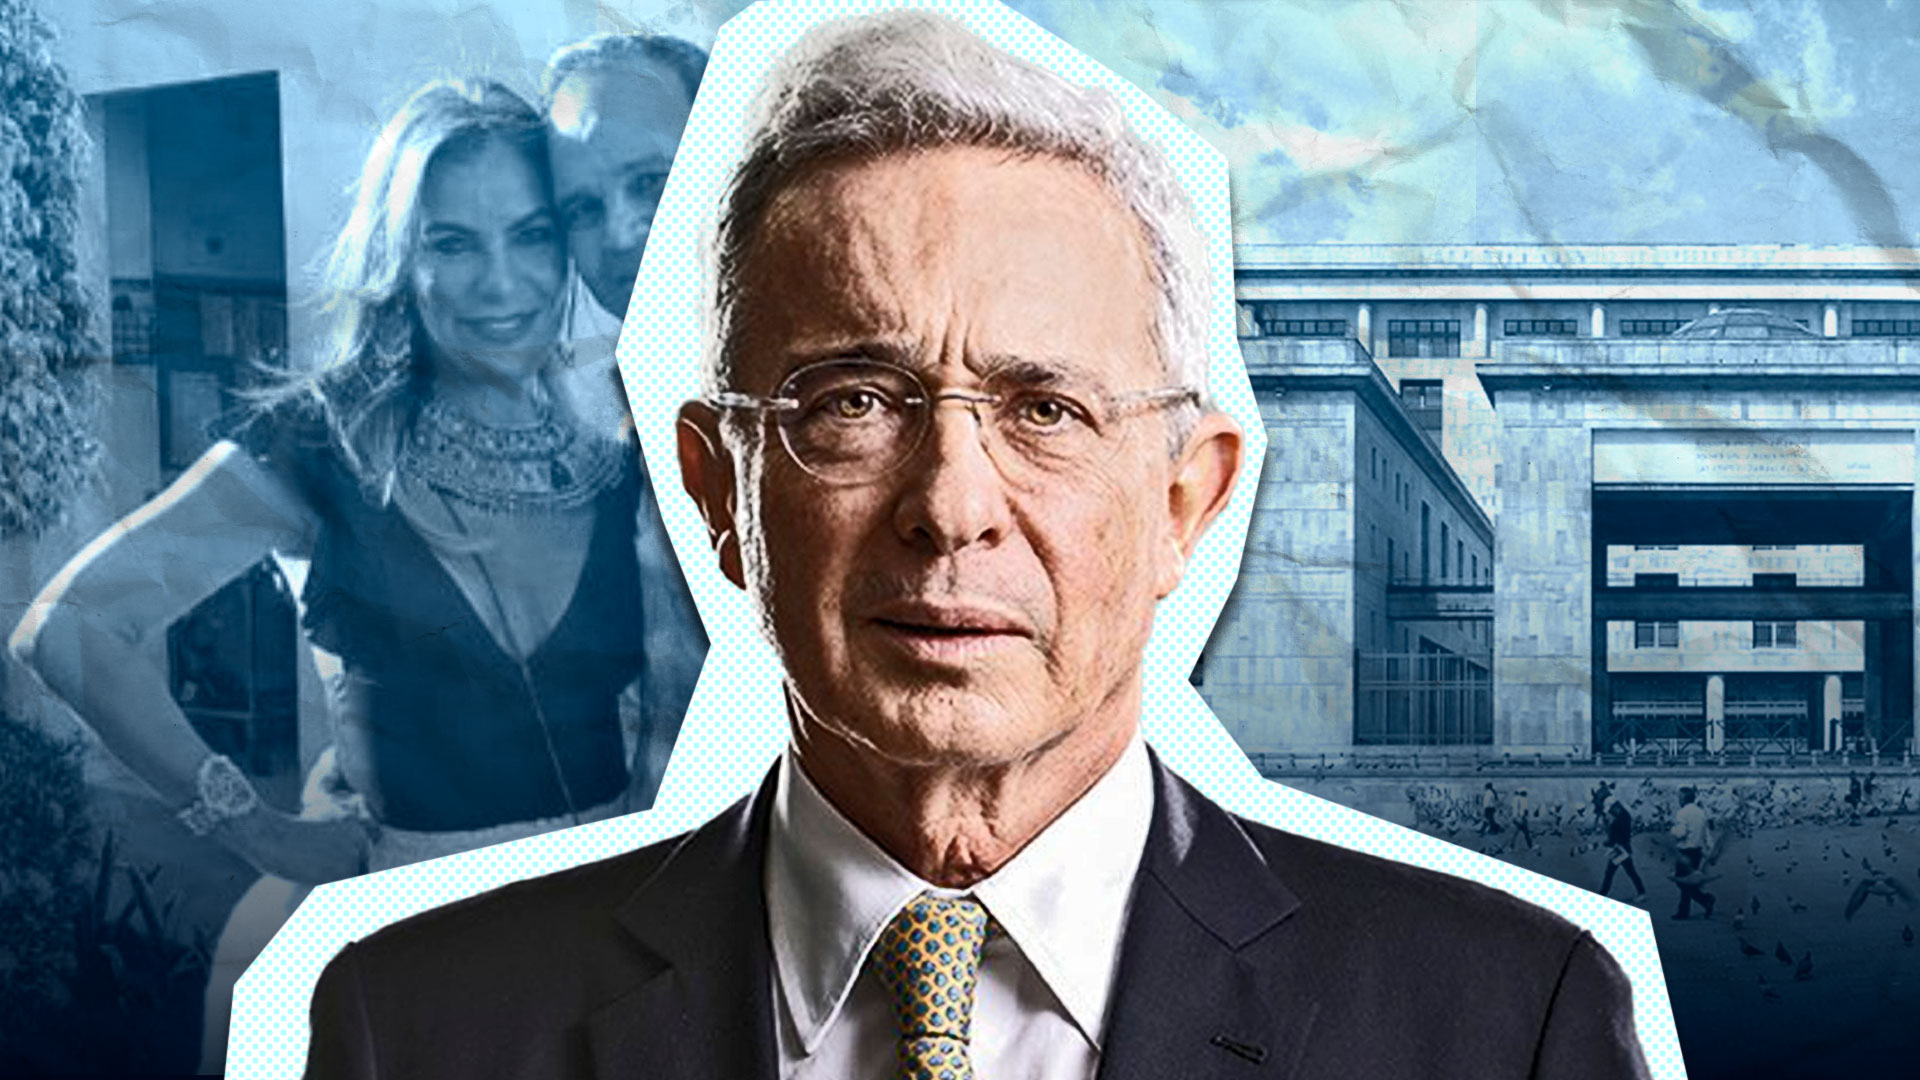 Álvaro Uribe Vélez will not be investigated in the case of the "ñeñepolitica": Infobae.